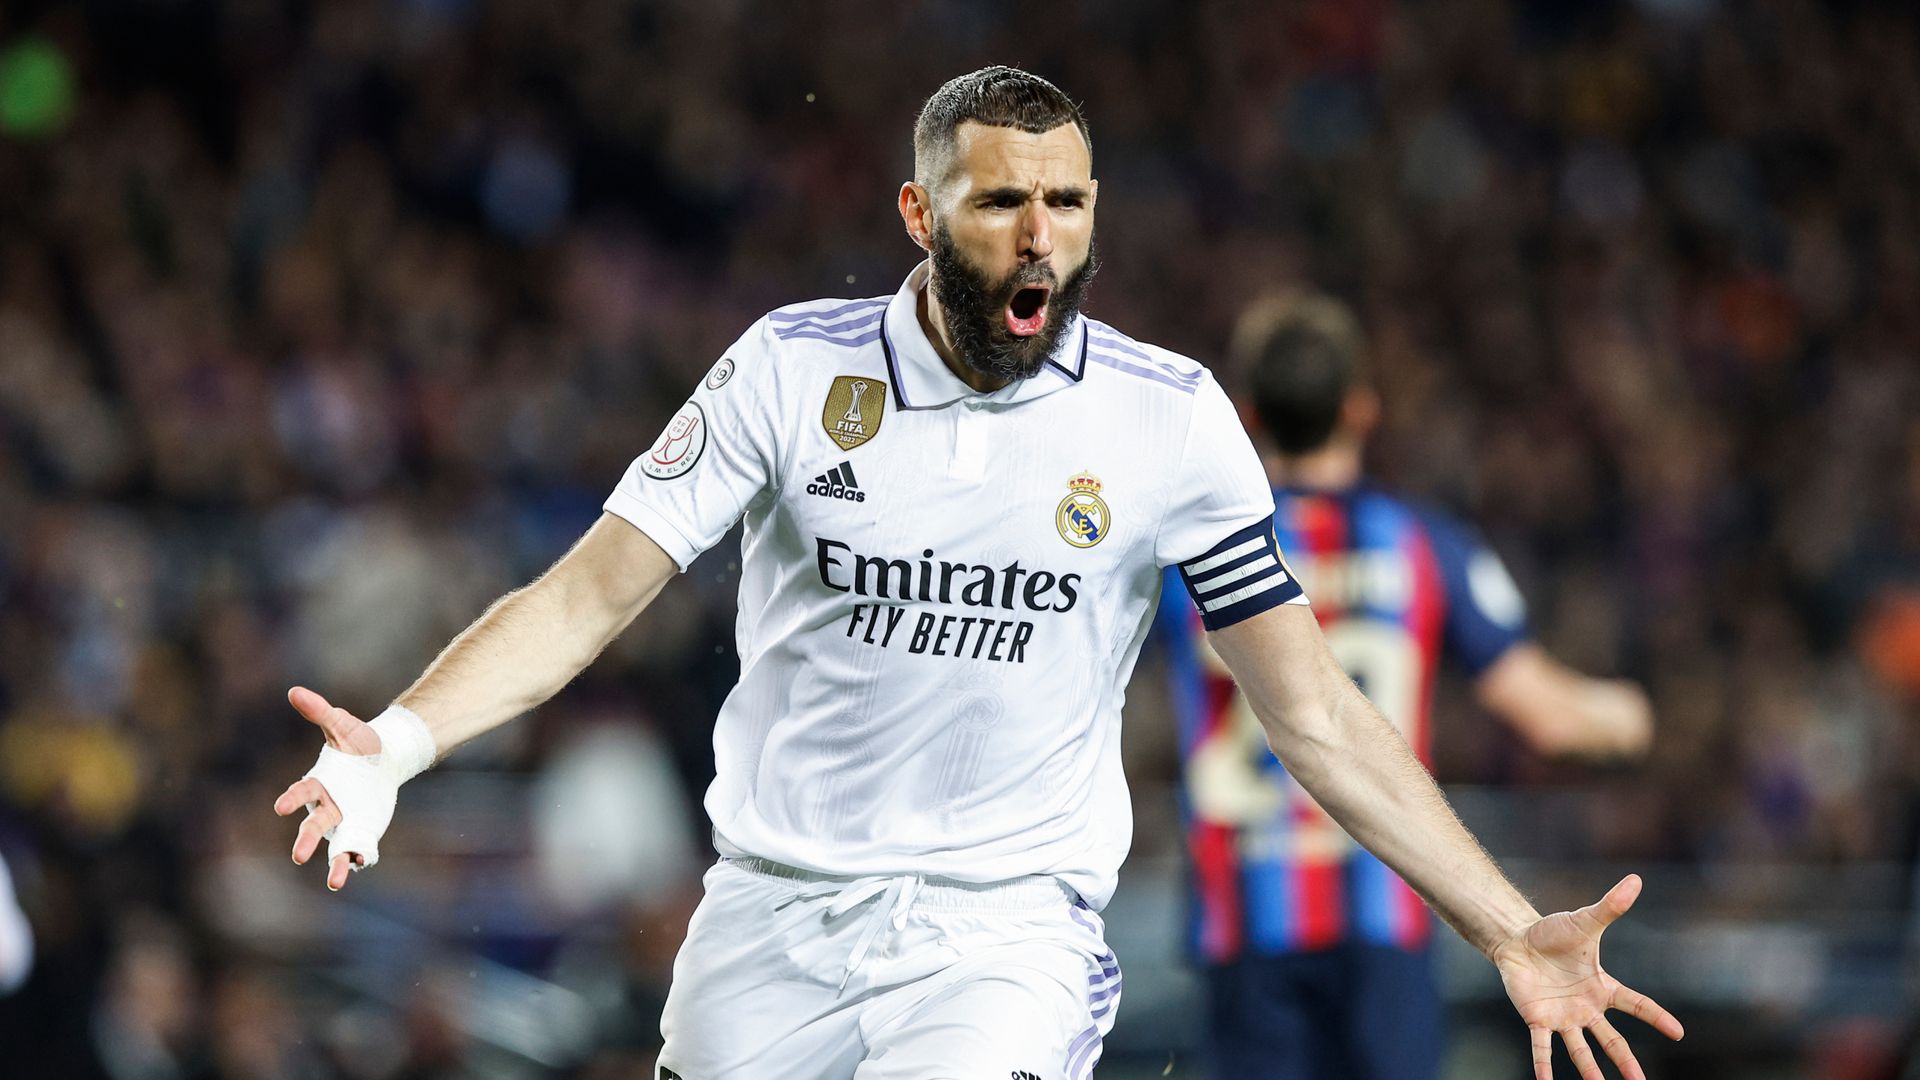 Barcelona stunned as Benzema hat-trick sends Real into Copa del Rey final